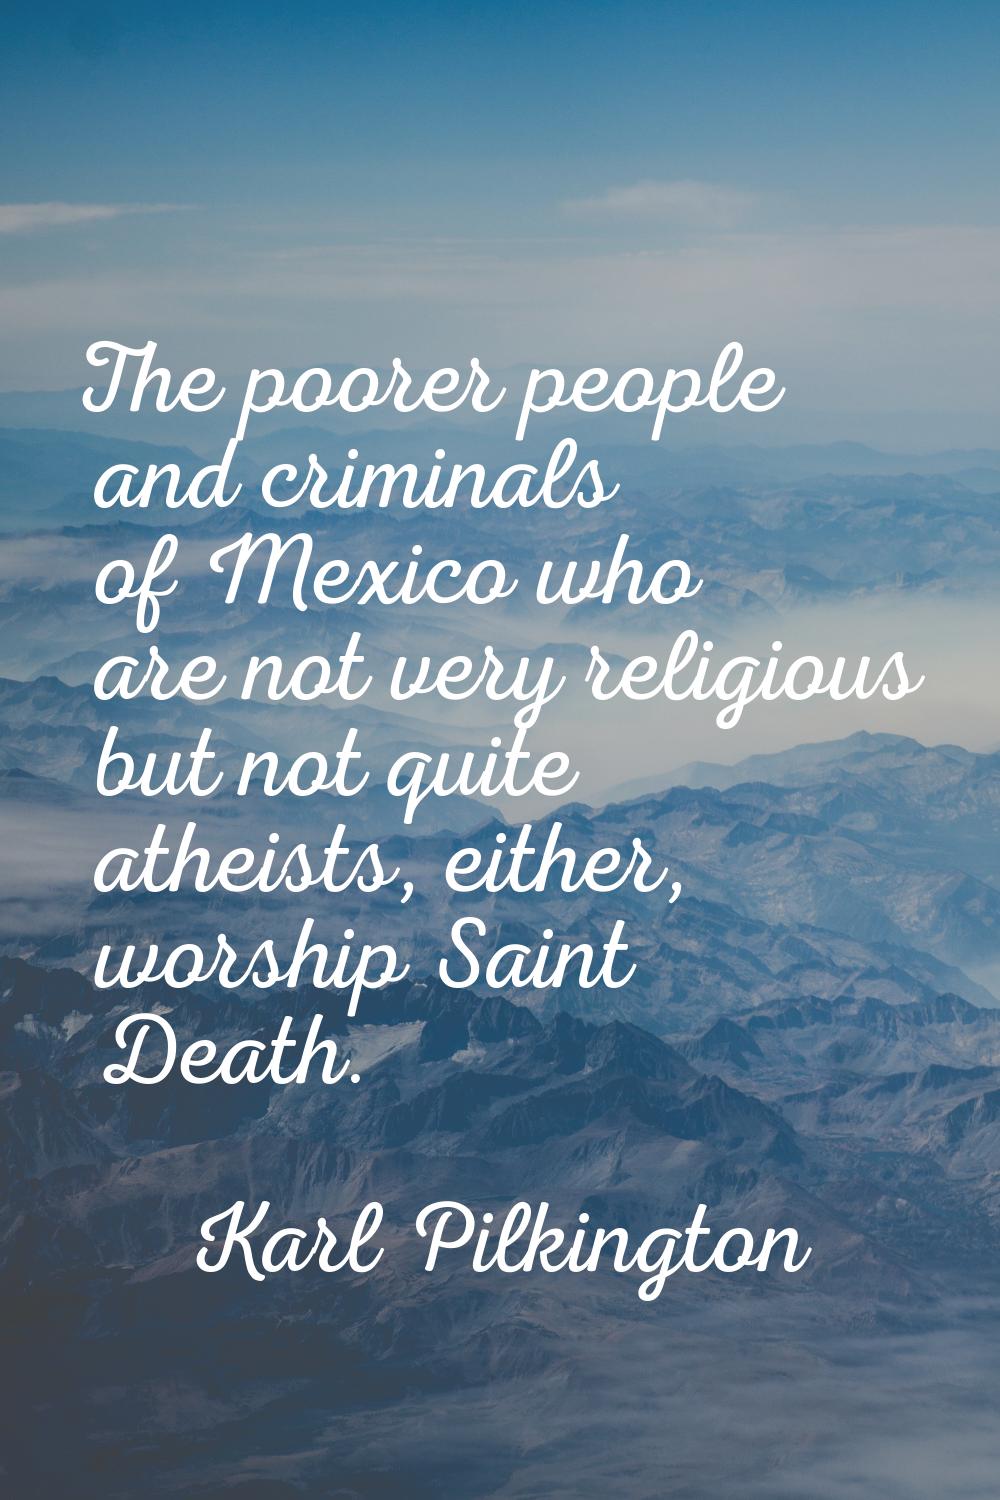 The poorer people and criminals of Mexico who are not very religious but not quite atheists, either